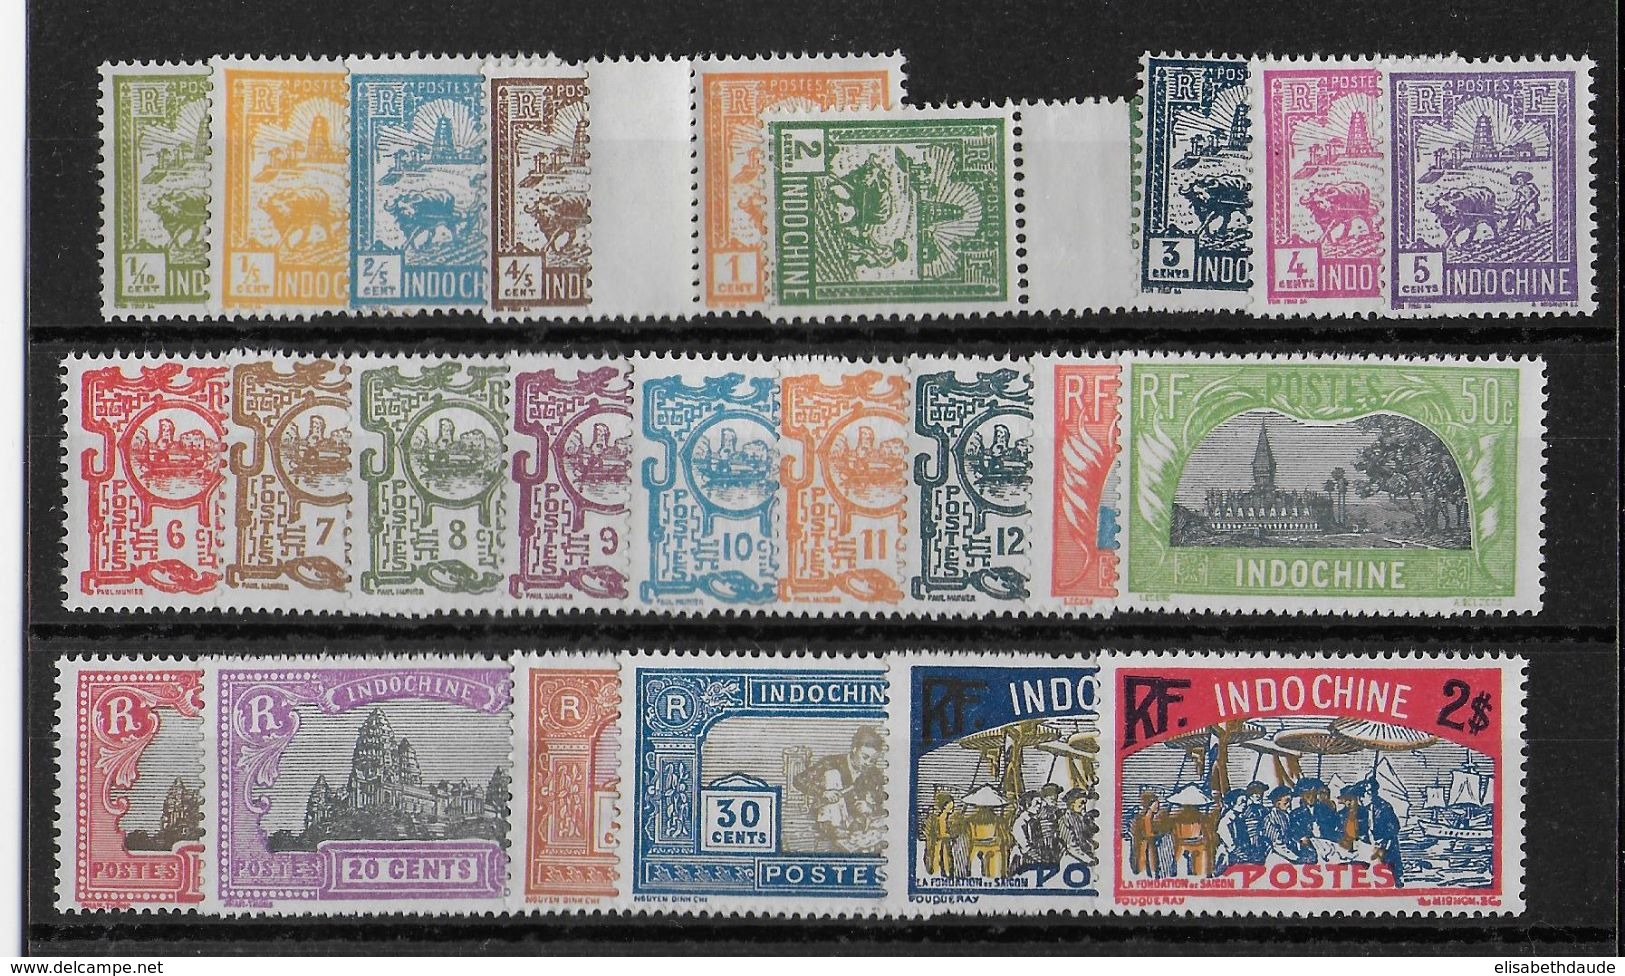 INDOCHINE - YVERT N°123/146 * CHARNIERE CORRECTE (QUELQUES **) - COTE = 140 EUROS - Unused Stamps